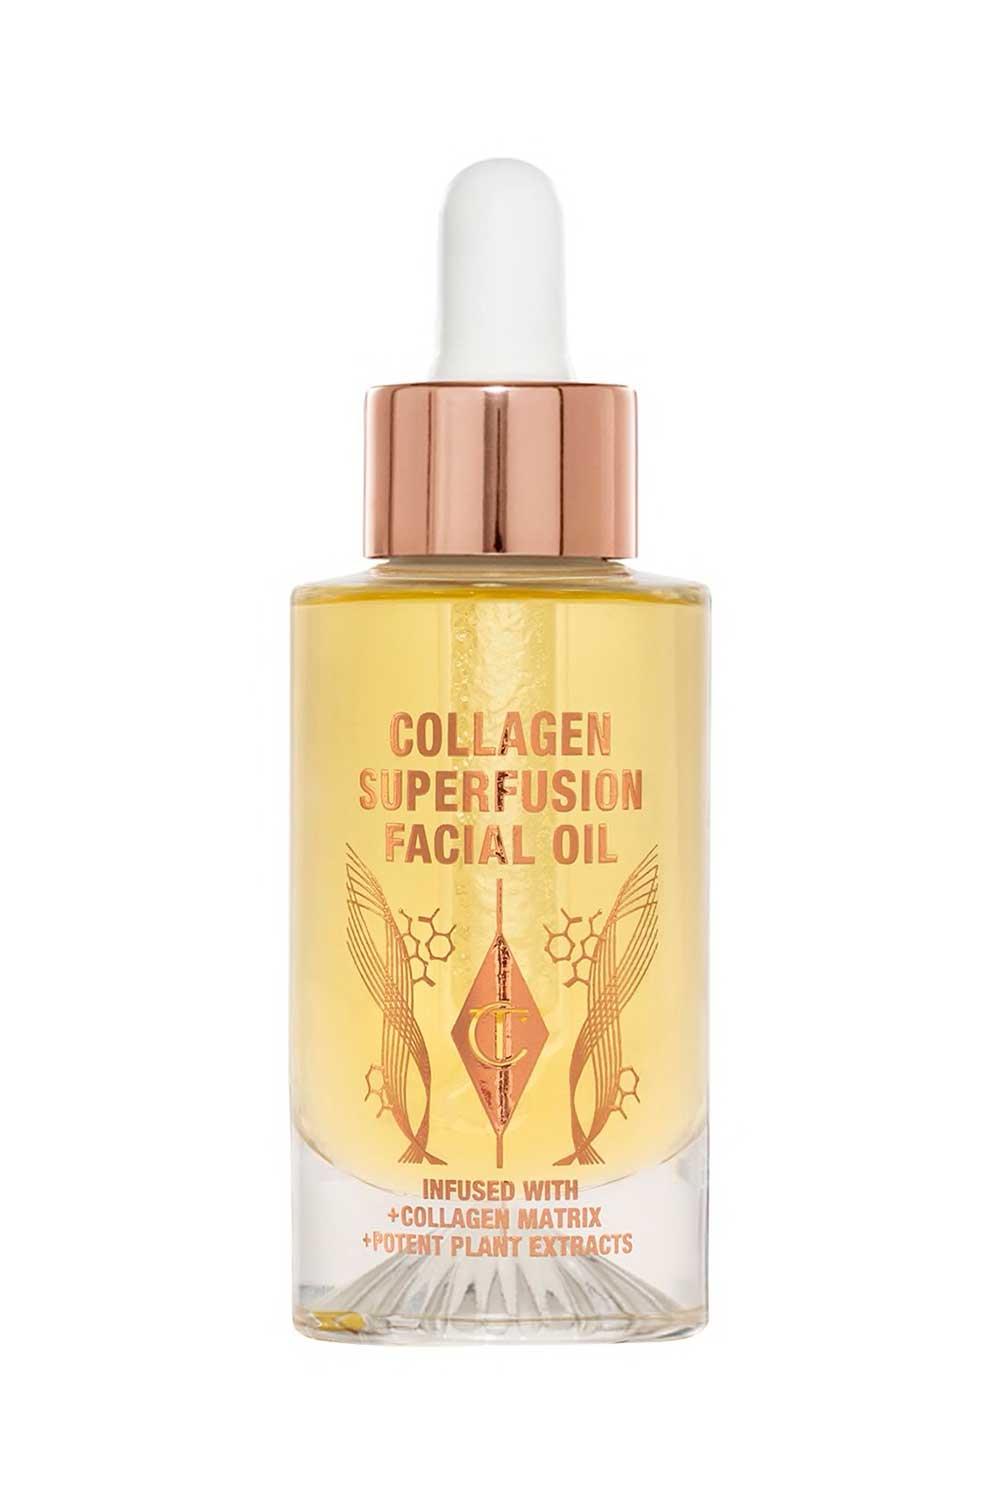 Collagen Superfusion Facial Oil, Charlotte Tilbury